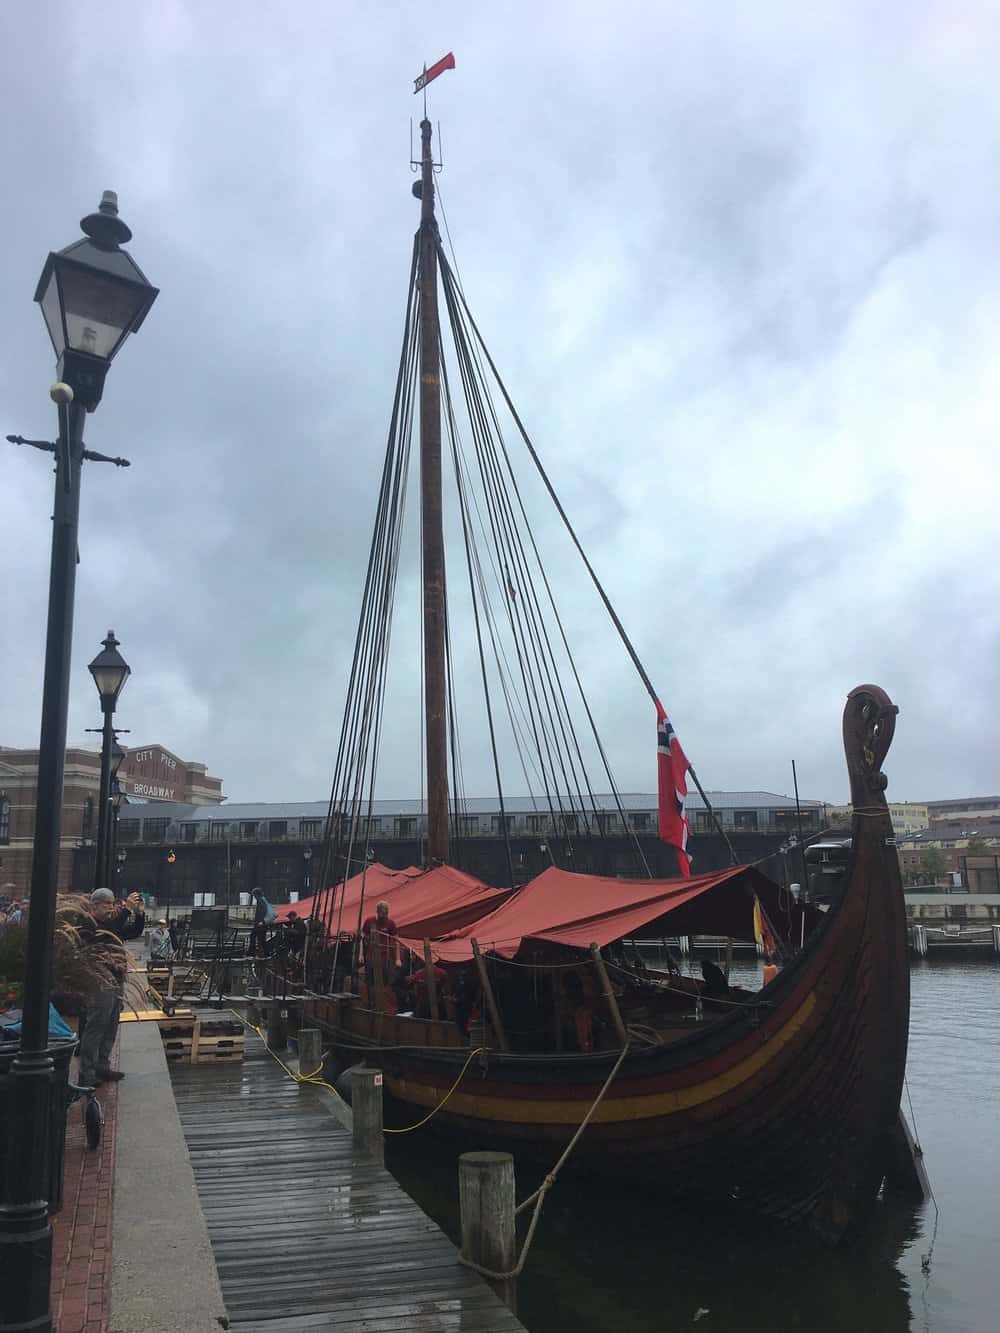  Draken’s East Coast tour recently stopped in Fells Point. 